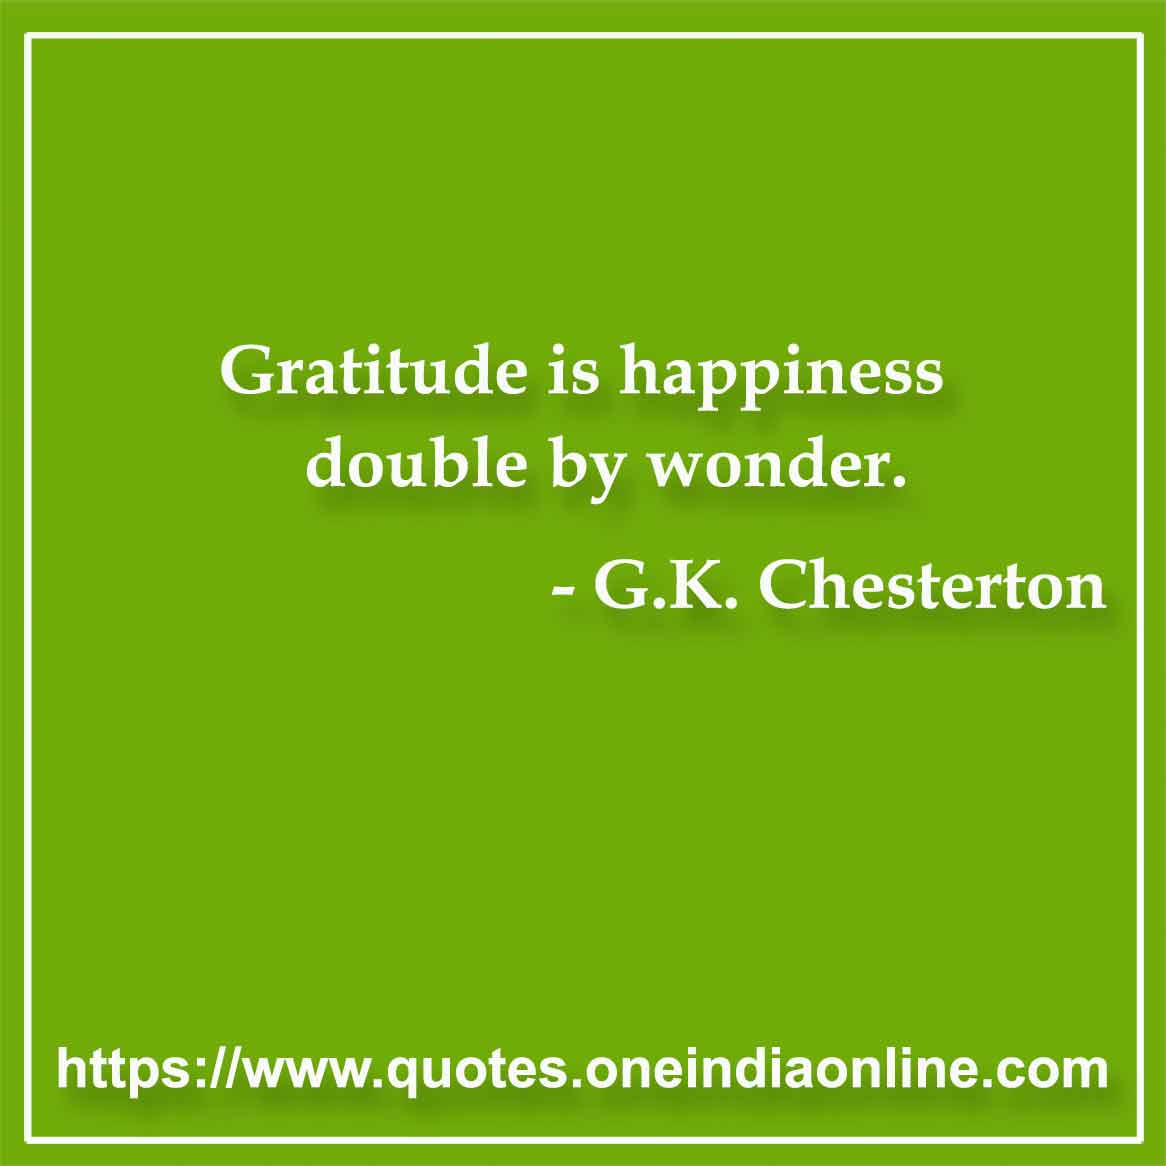 Gratitude is happiness double by wonder. 

-  G.K. Chesterton